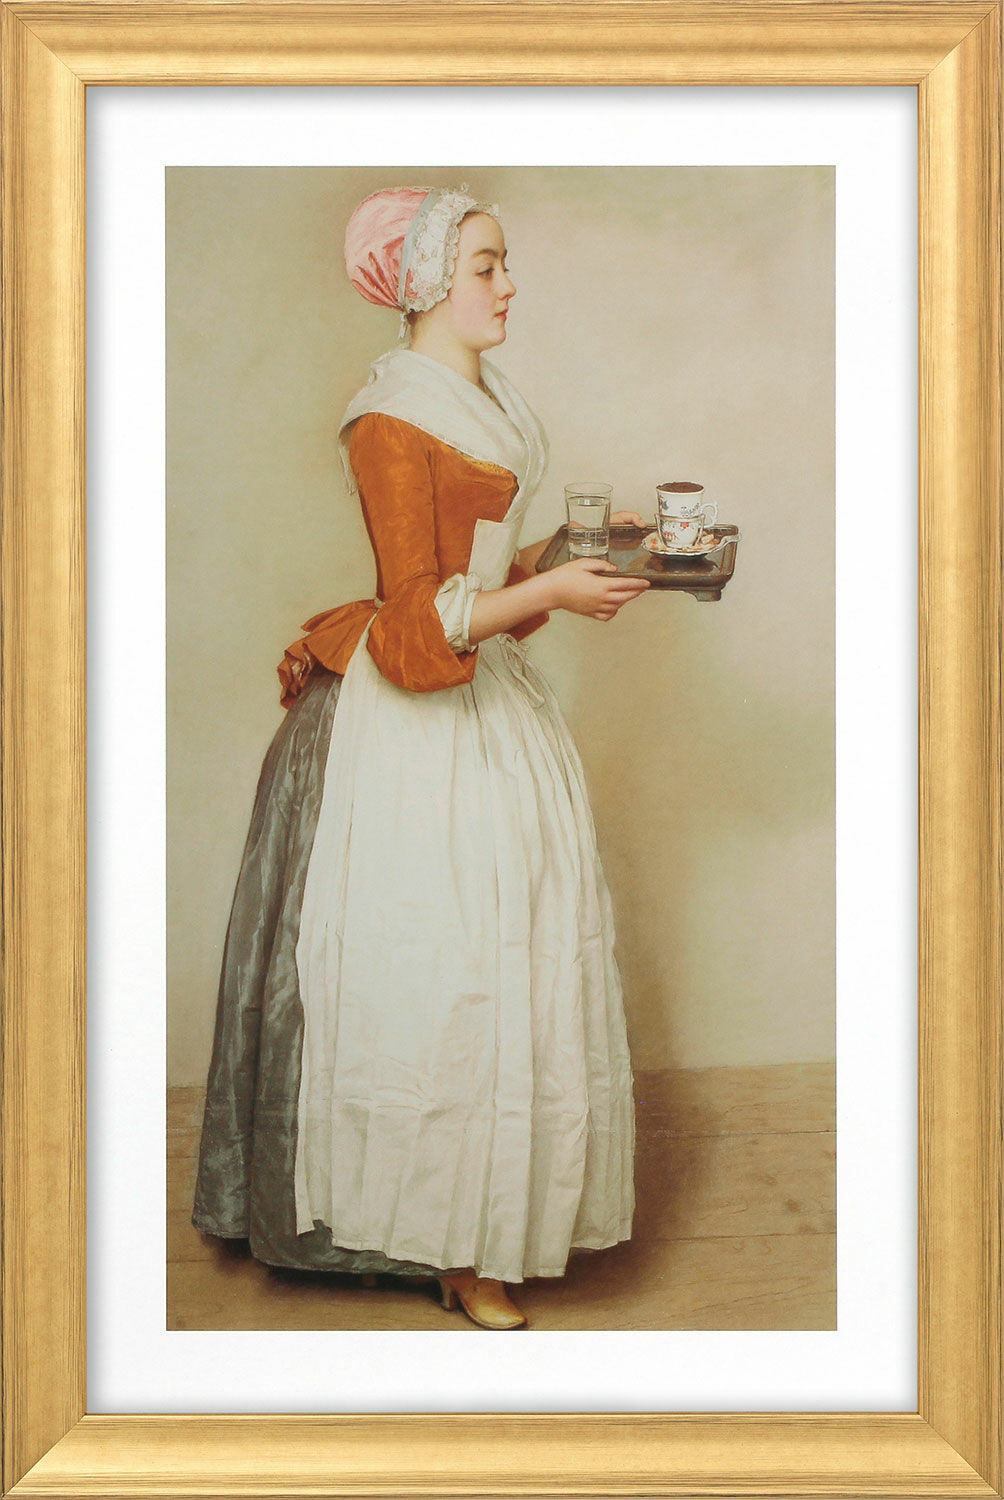 Picture "Chocolate Girl" (1743-45), framed by Jean-Étienne Liotard